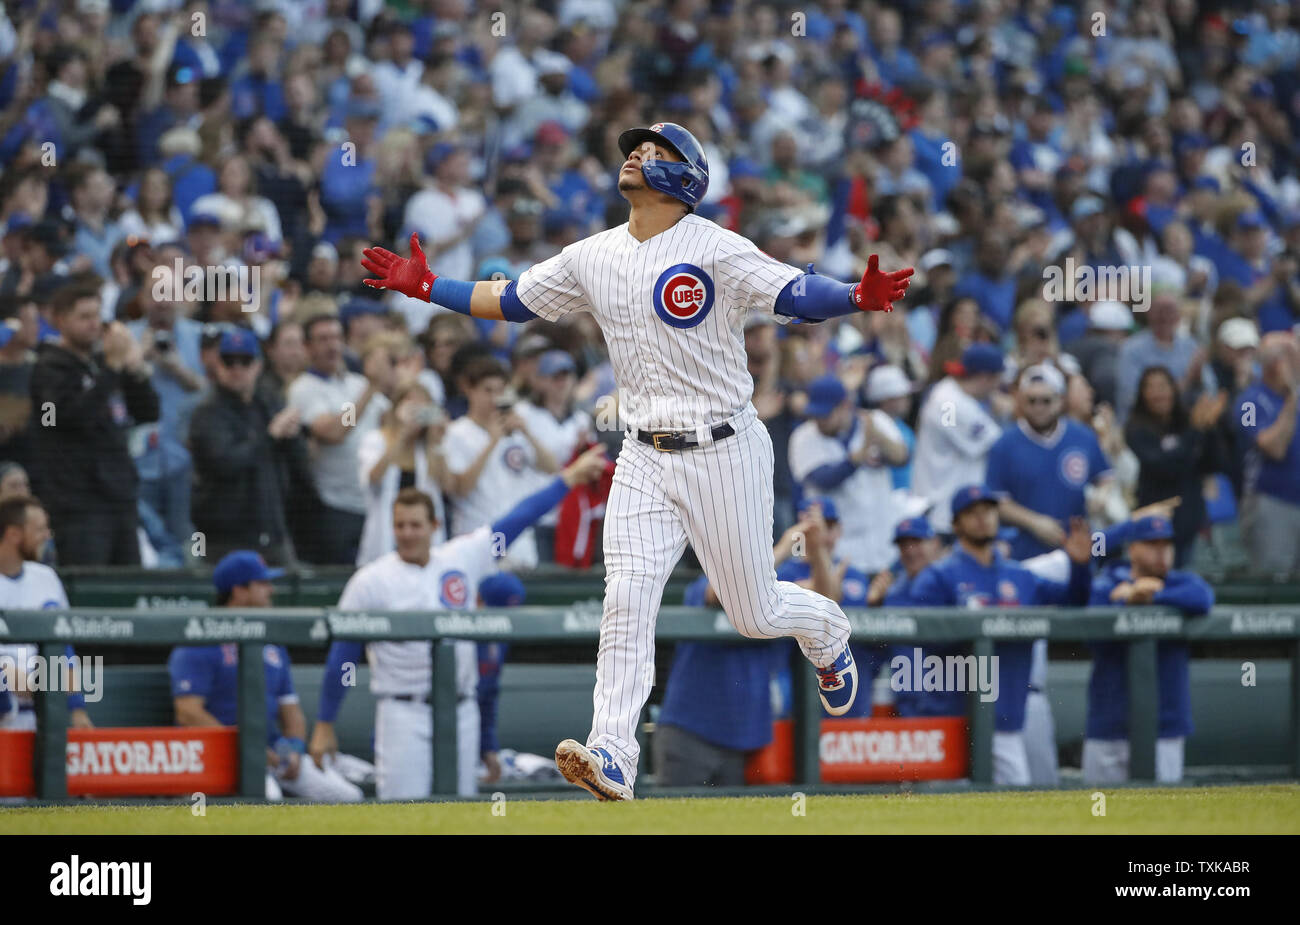 Chicago Cubs' Willson Contreras rounds the bases after hitting a solo home run against the St. Louis Cardinals in the second inning at Wrigley Field on May 5, 2019 in Chicago. Photo by Kamil Krzaczynski/UPI Stock Photo